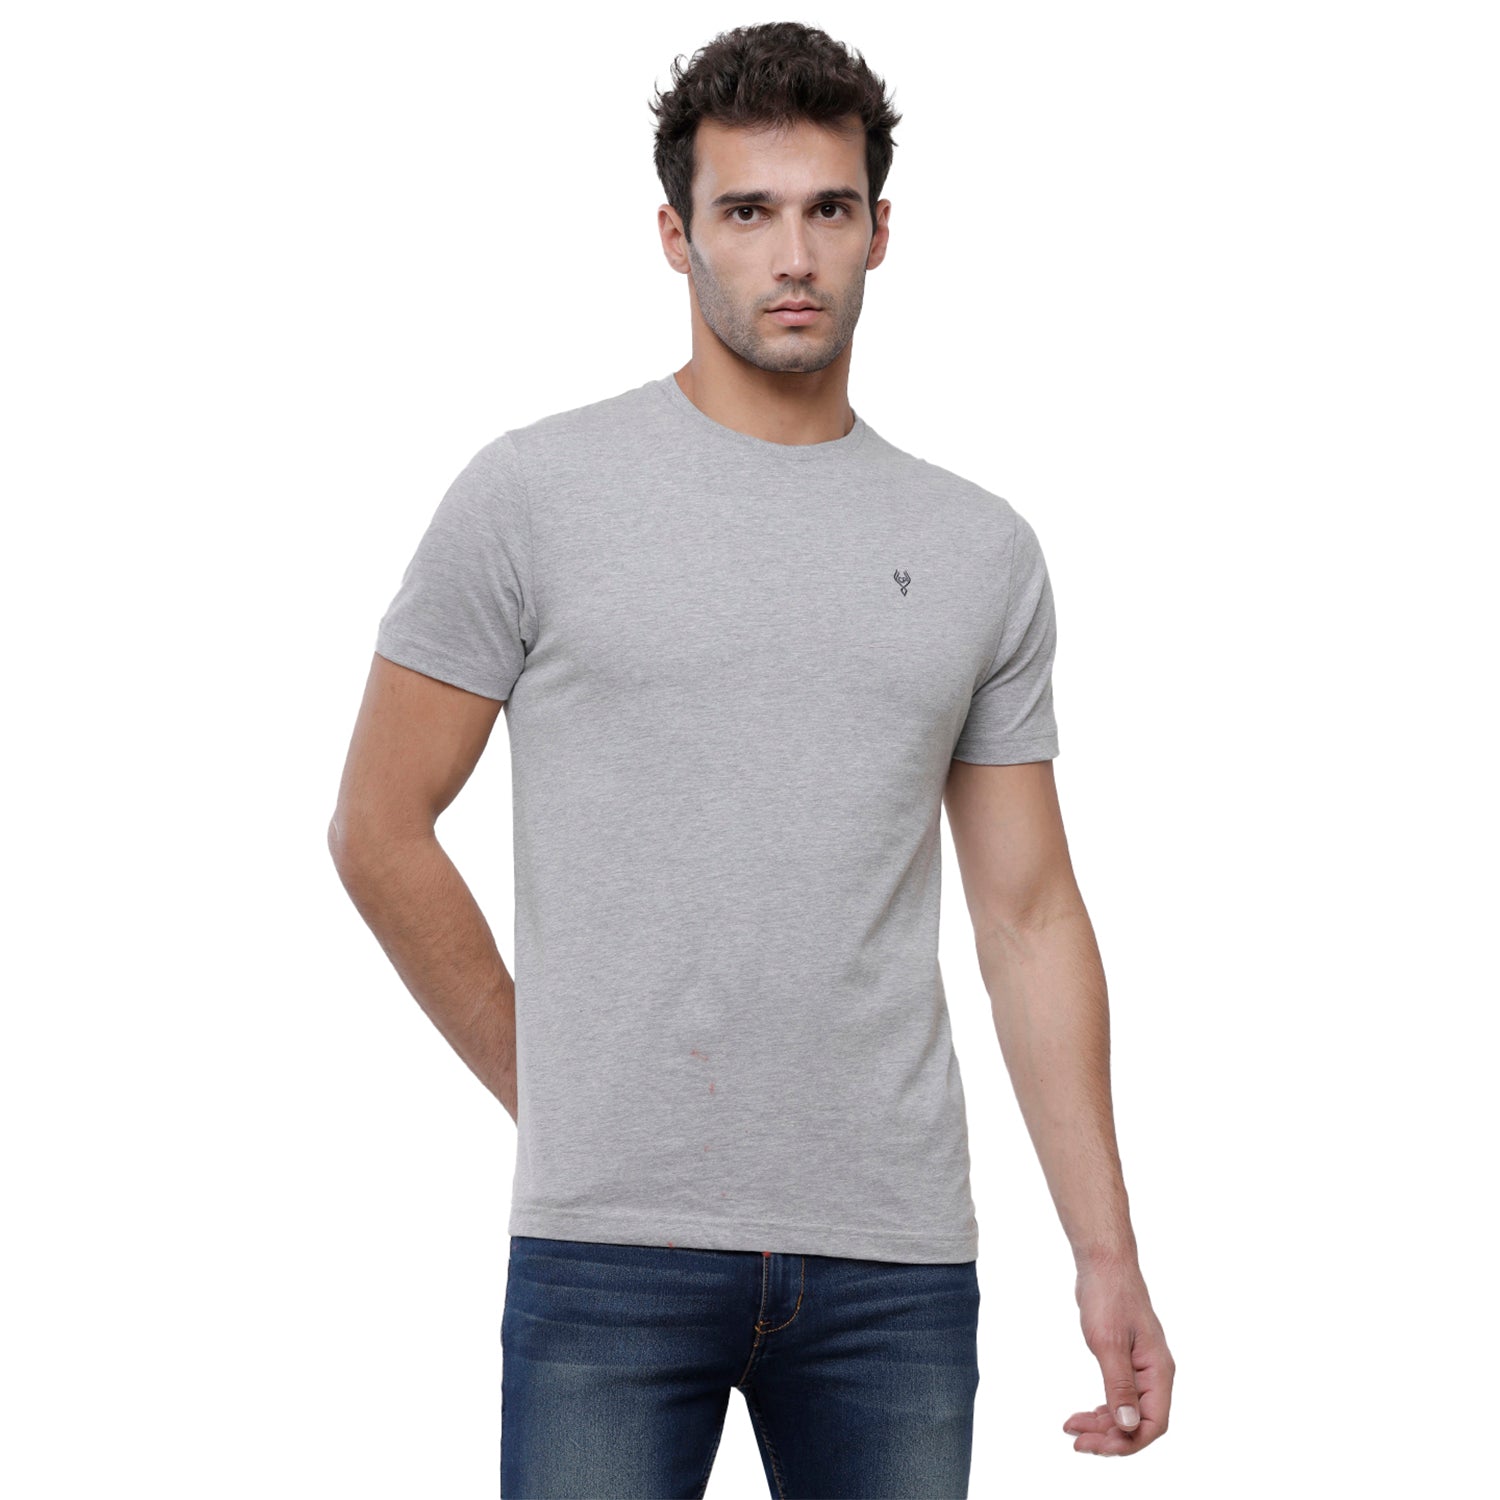 Classic Polo Men's Solid Single Jersey Light Grey Half Sleeve Slim Fit T-Shirt - Kore-10 T-shirt Classic Polo 